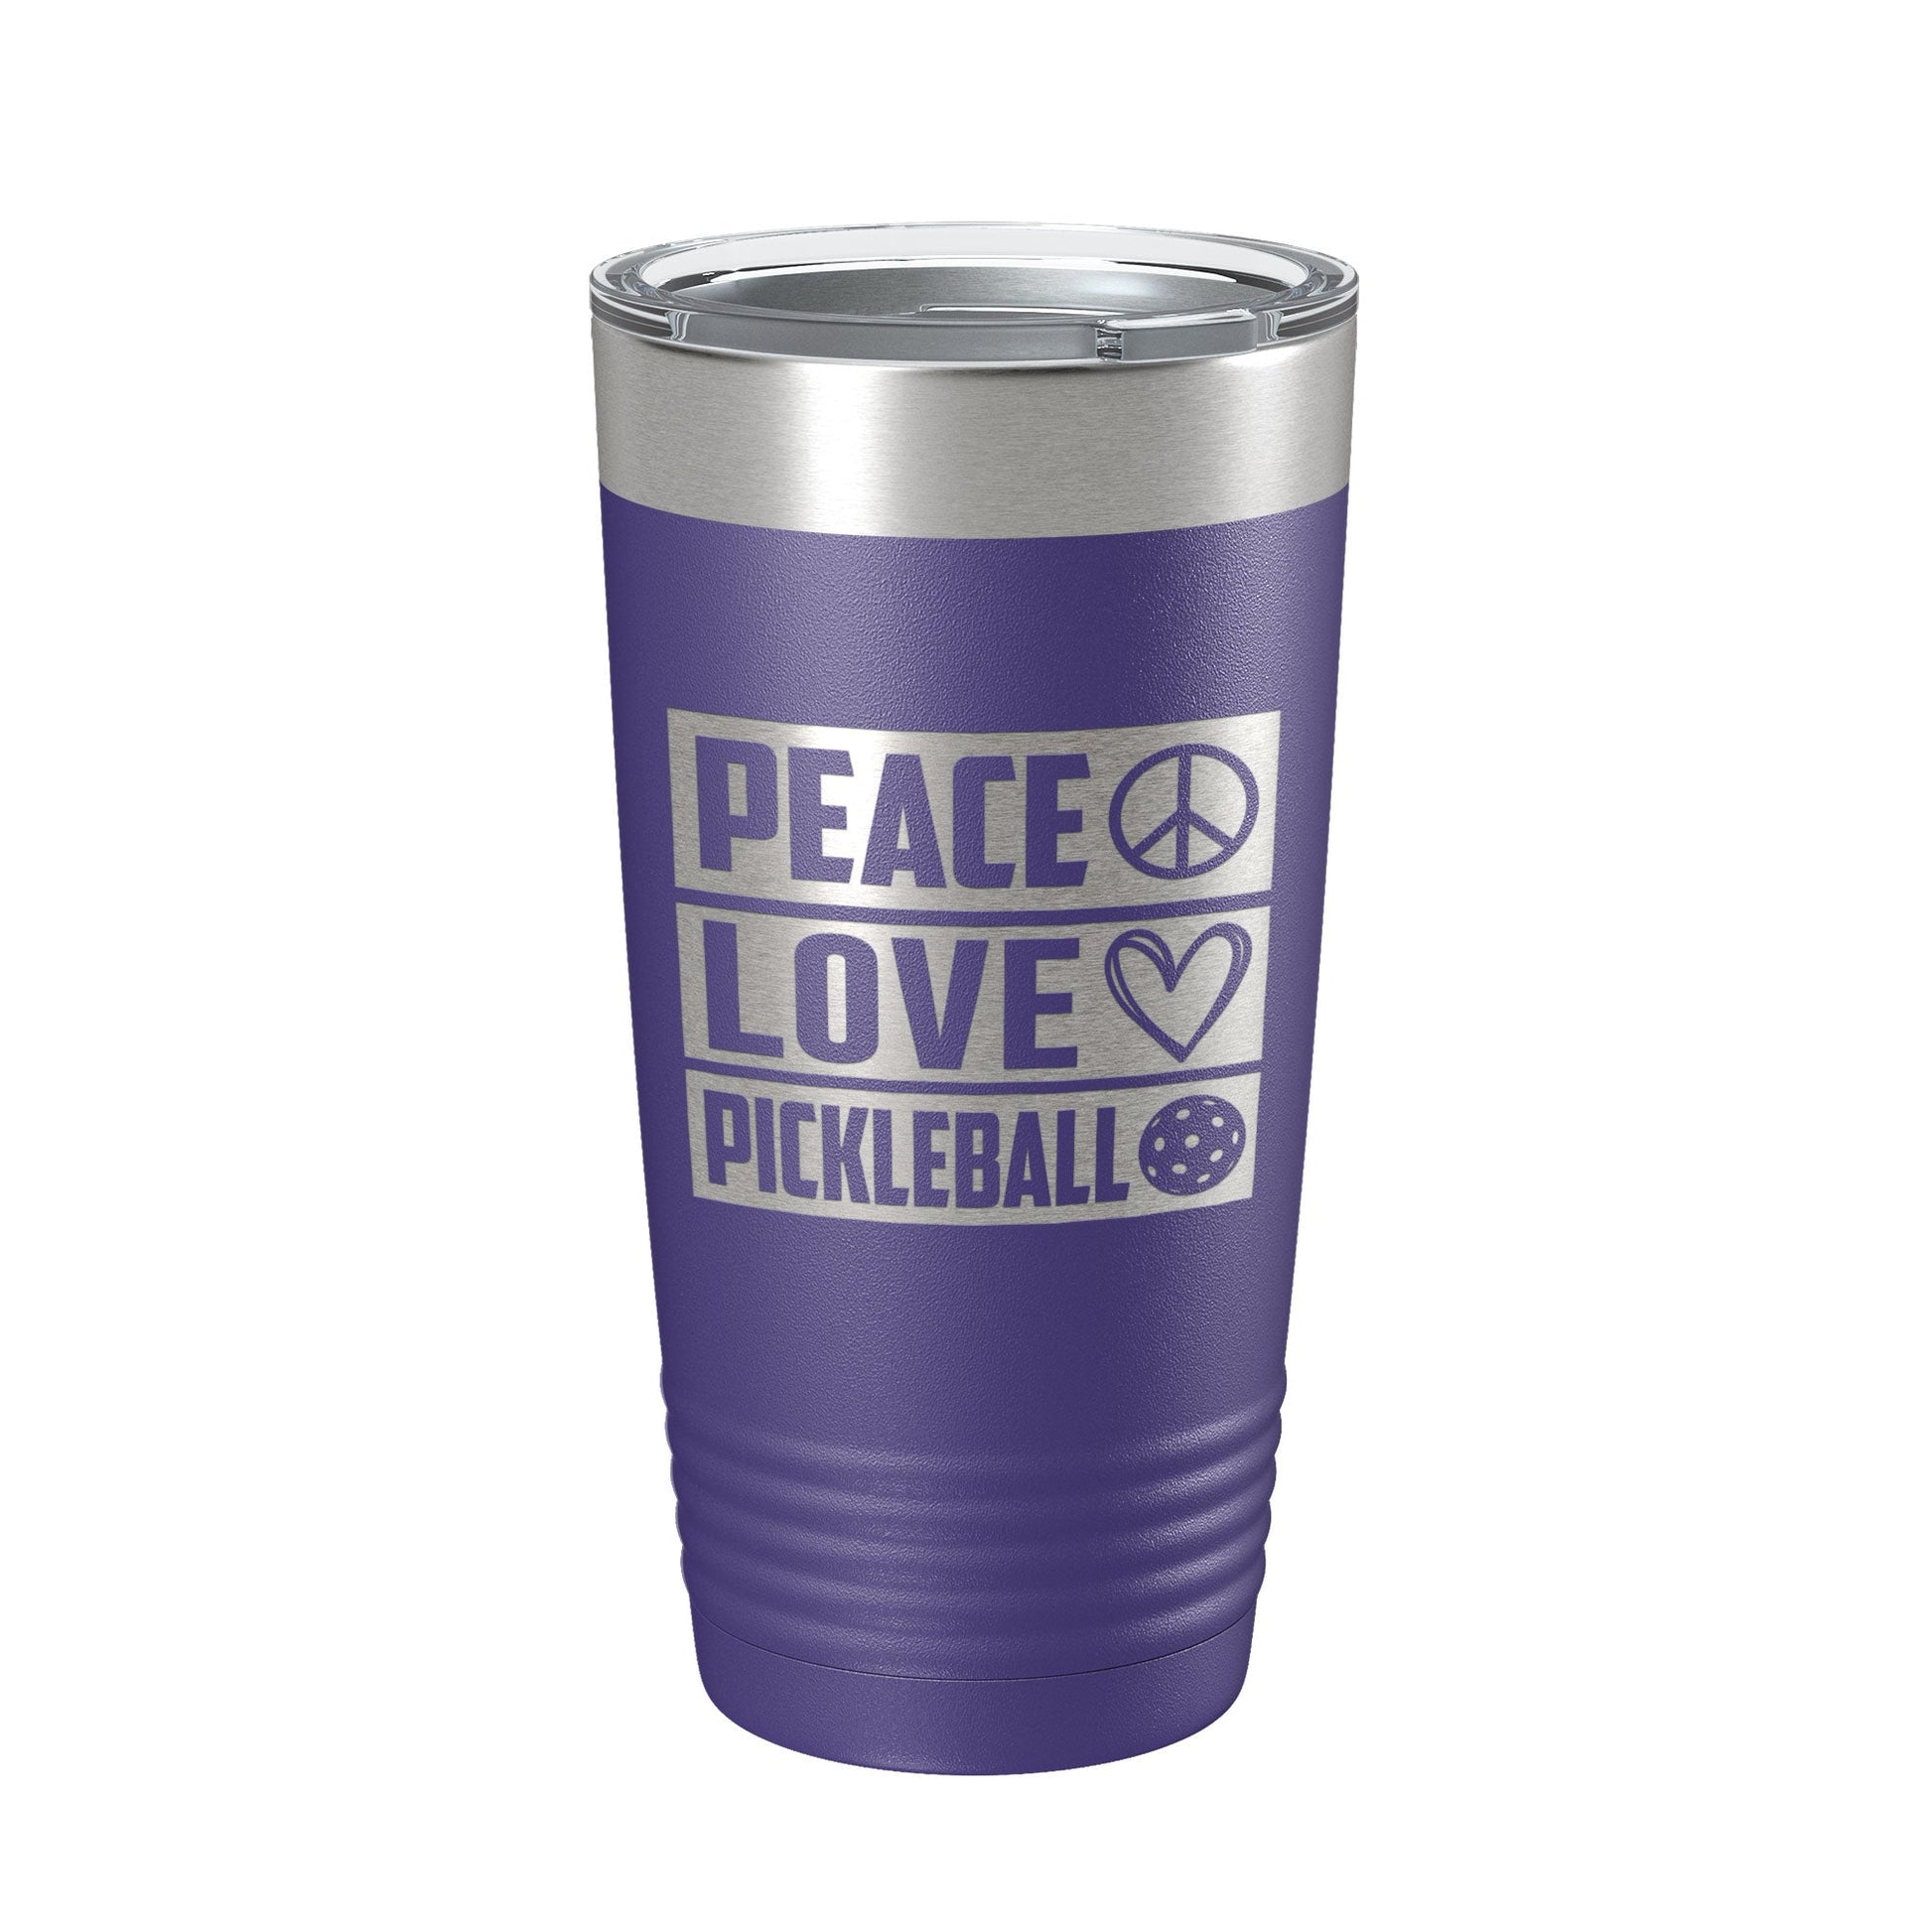 Peace Love Pickleball Tumbler Travel Mug Insulated Laser Engraved Coffee Cup Pickle Ball Gift 20 oz-15